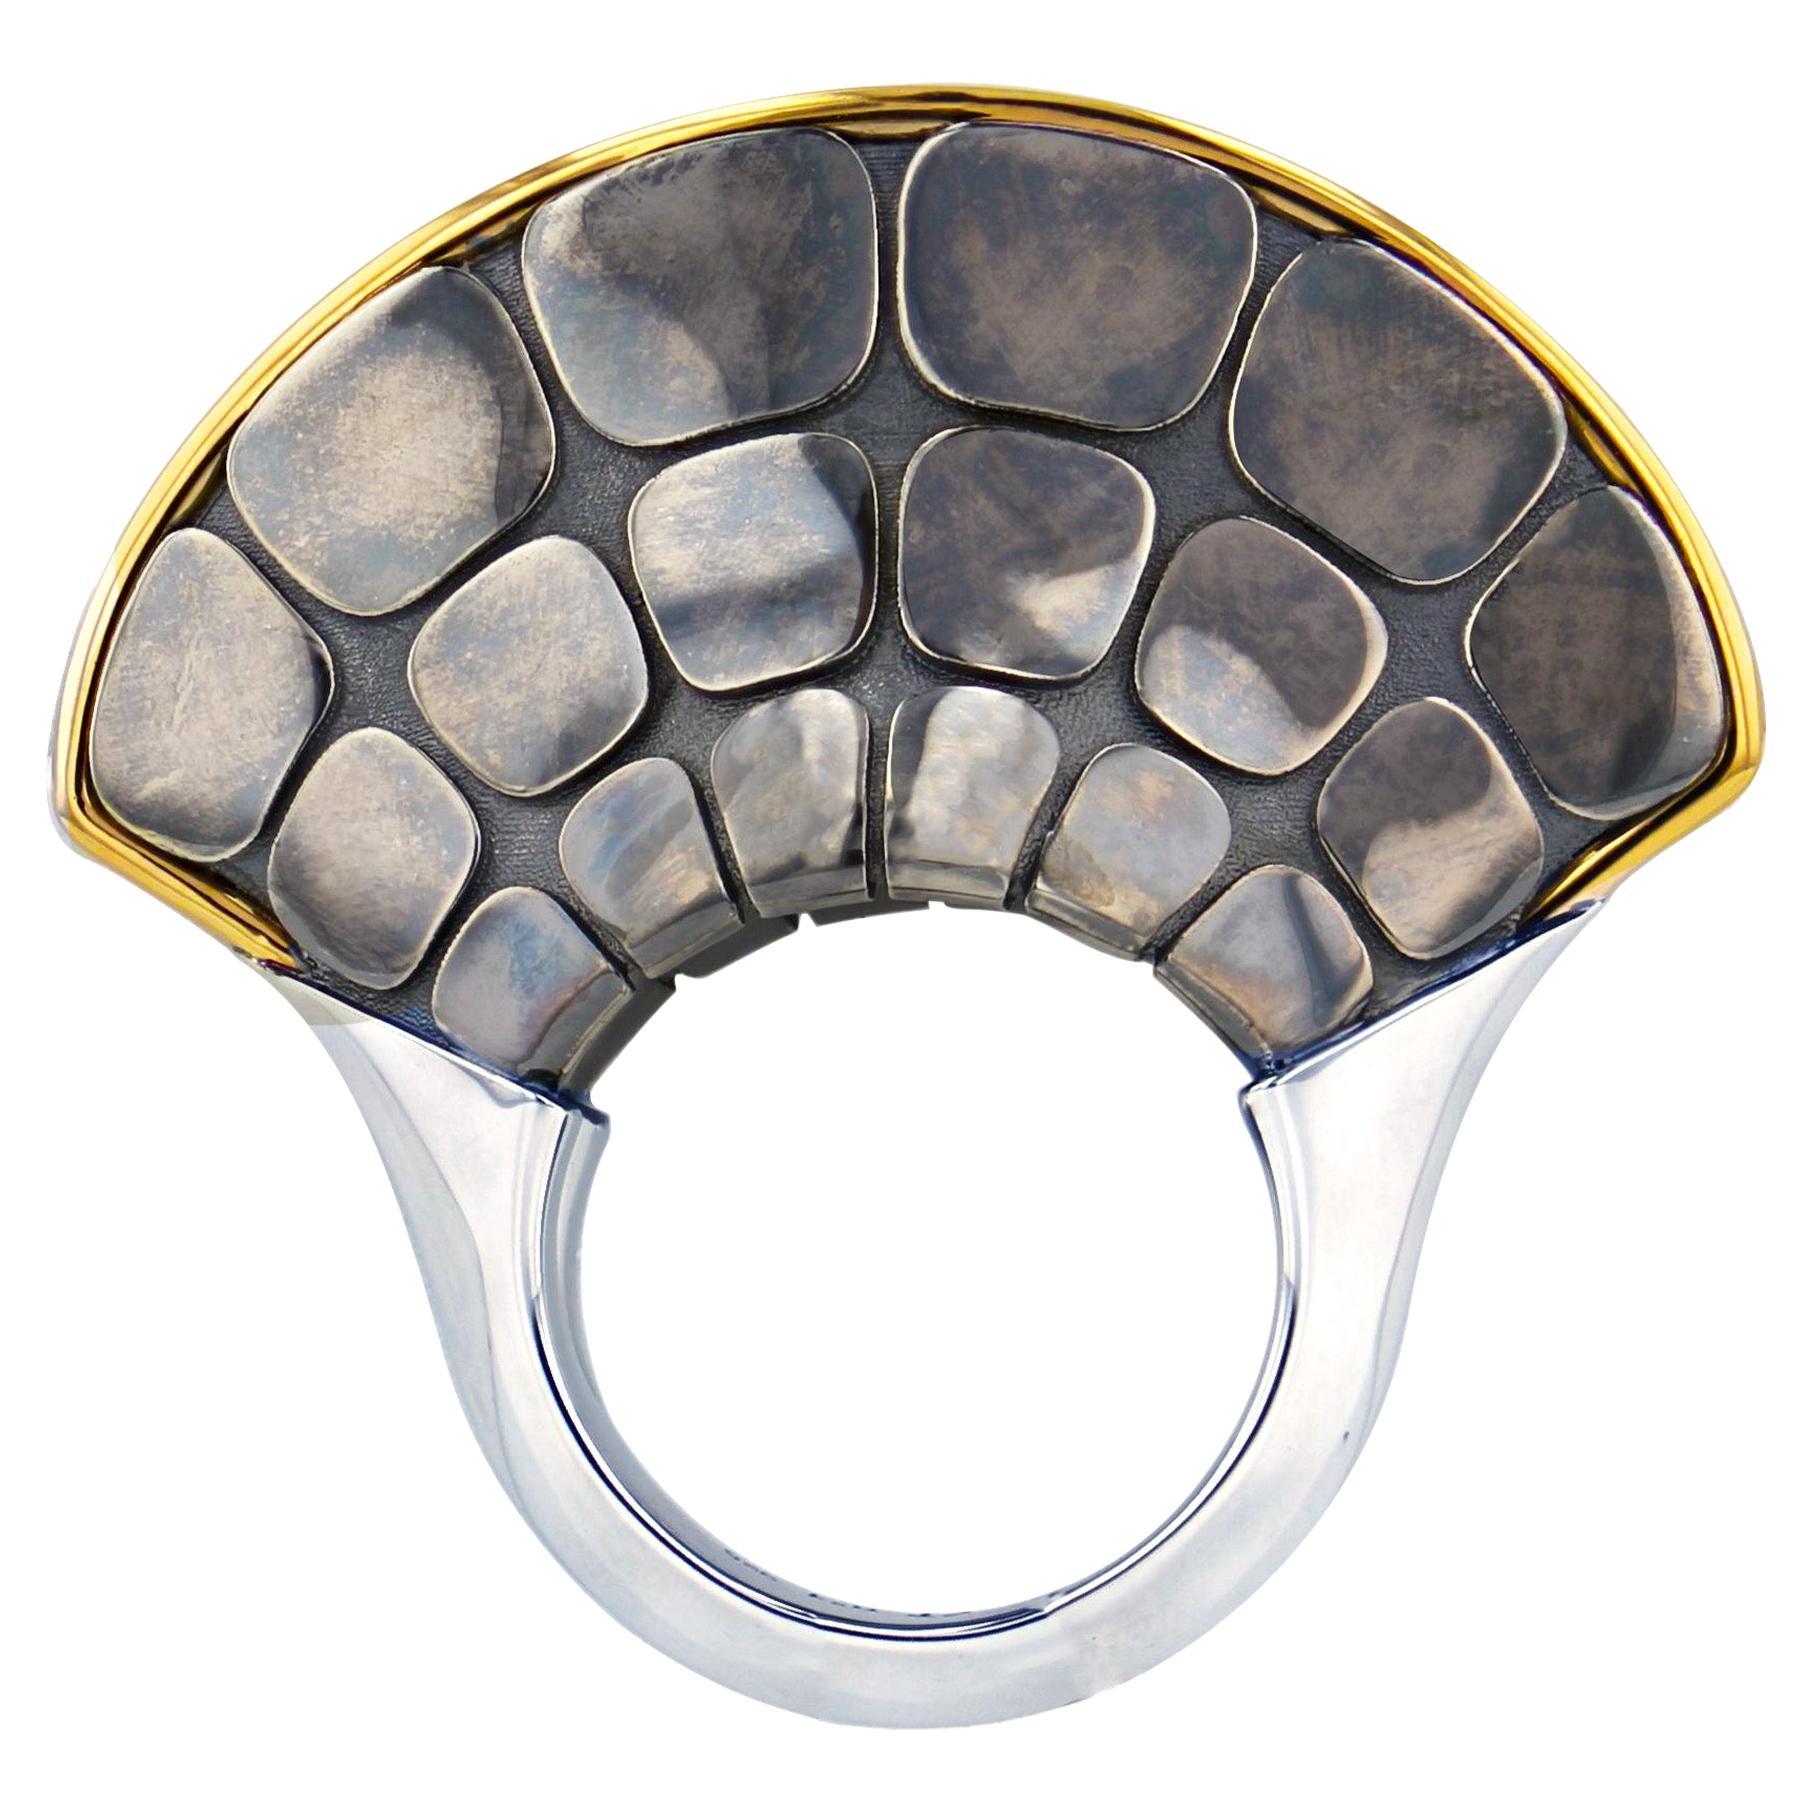 Grande Dorsal Ring in 18k Yellow Gold & Distressed Silver by Elie Top For Sale